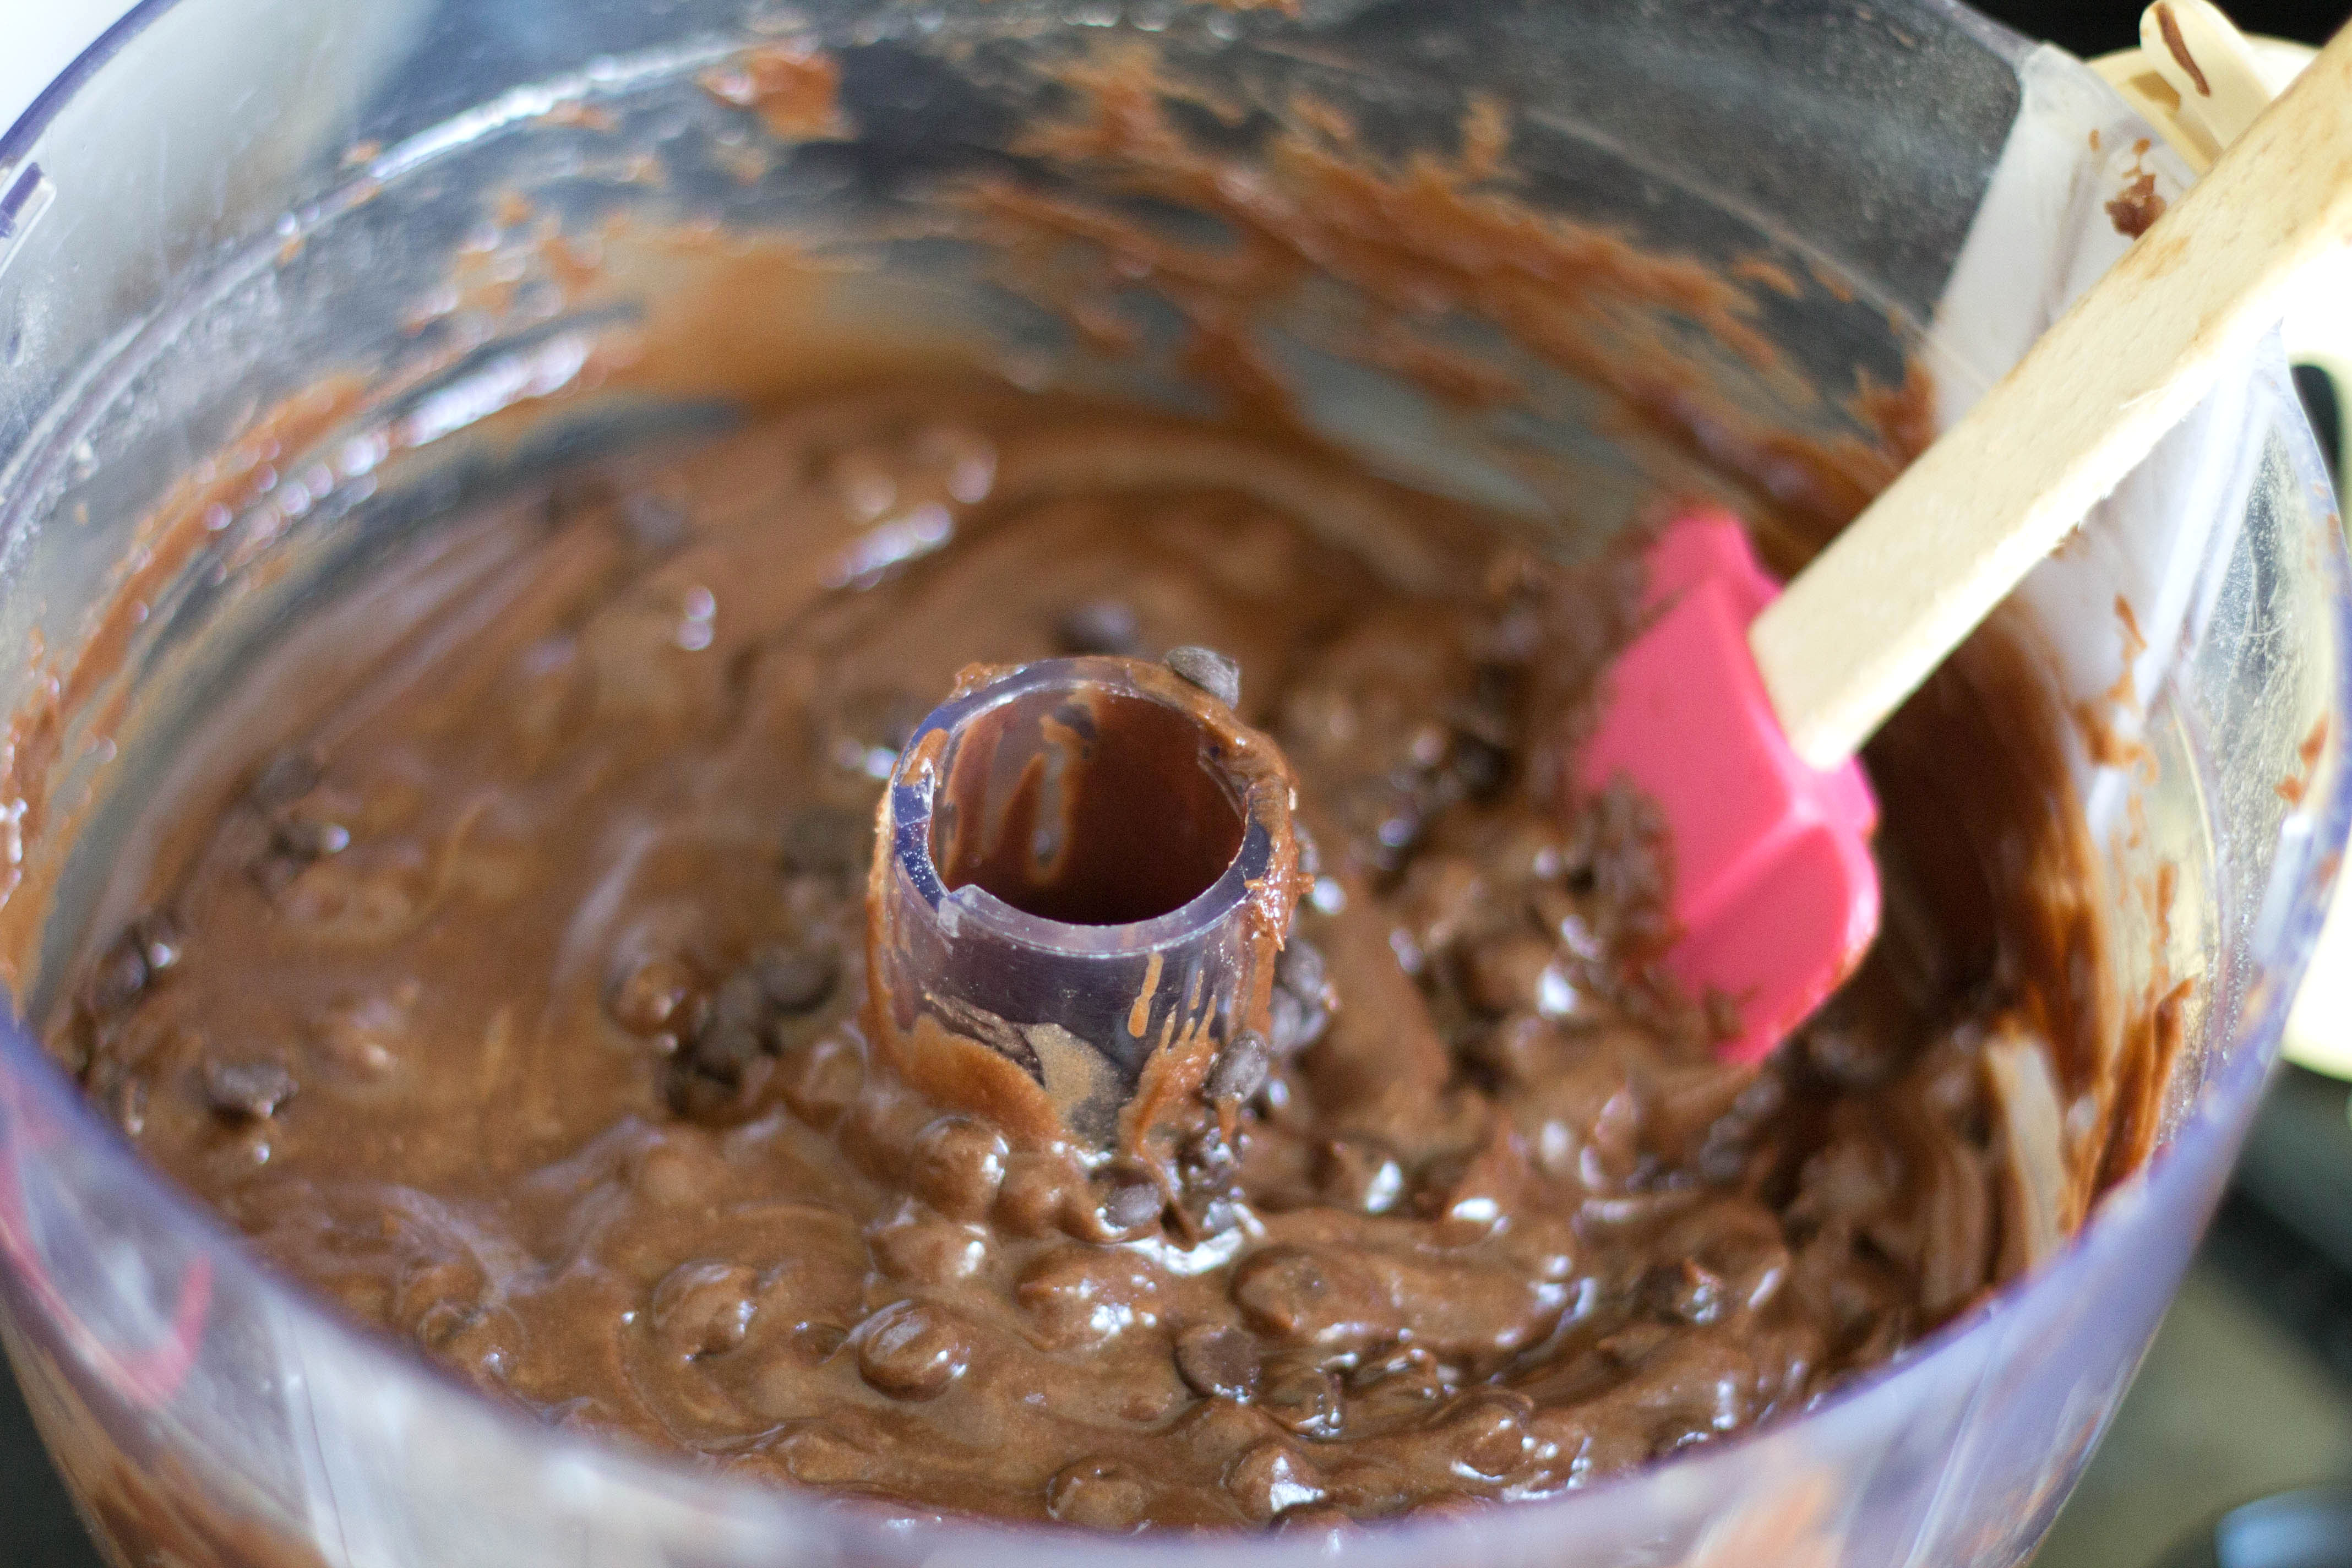 Chocolate Chip Banana Cake batter in a food mixer with a spatula